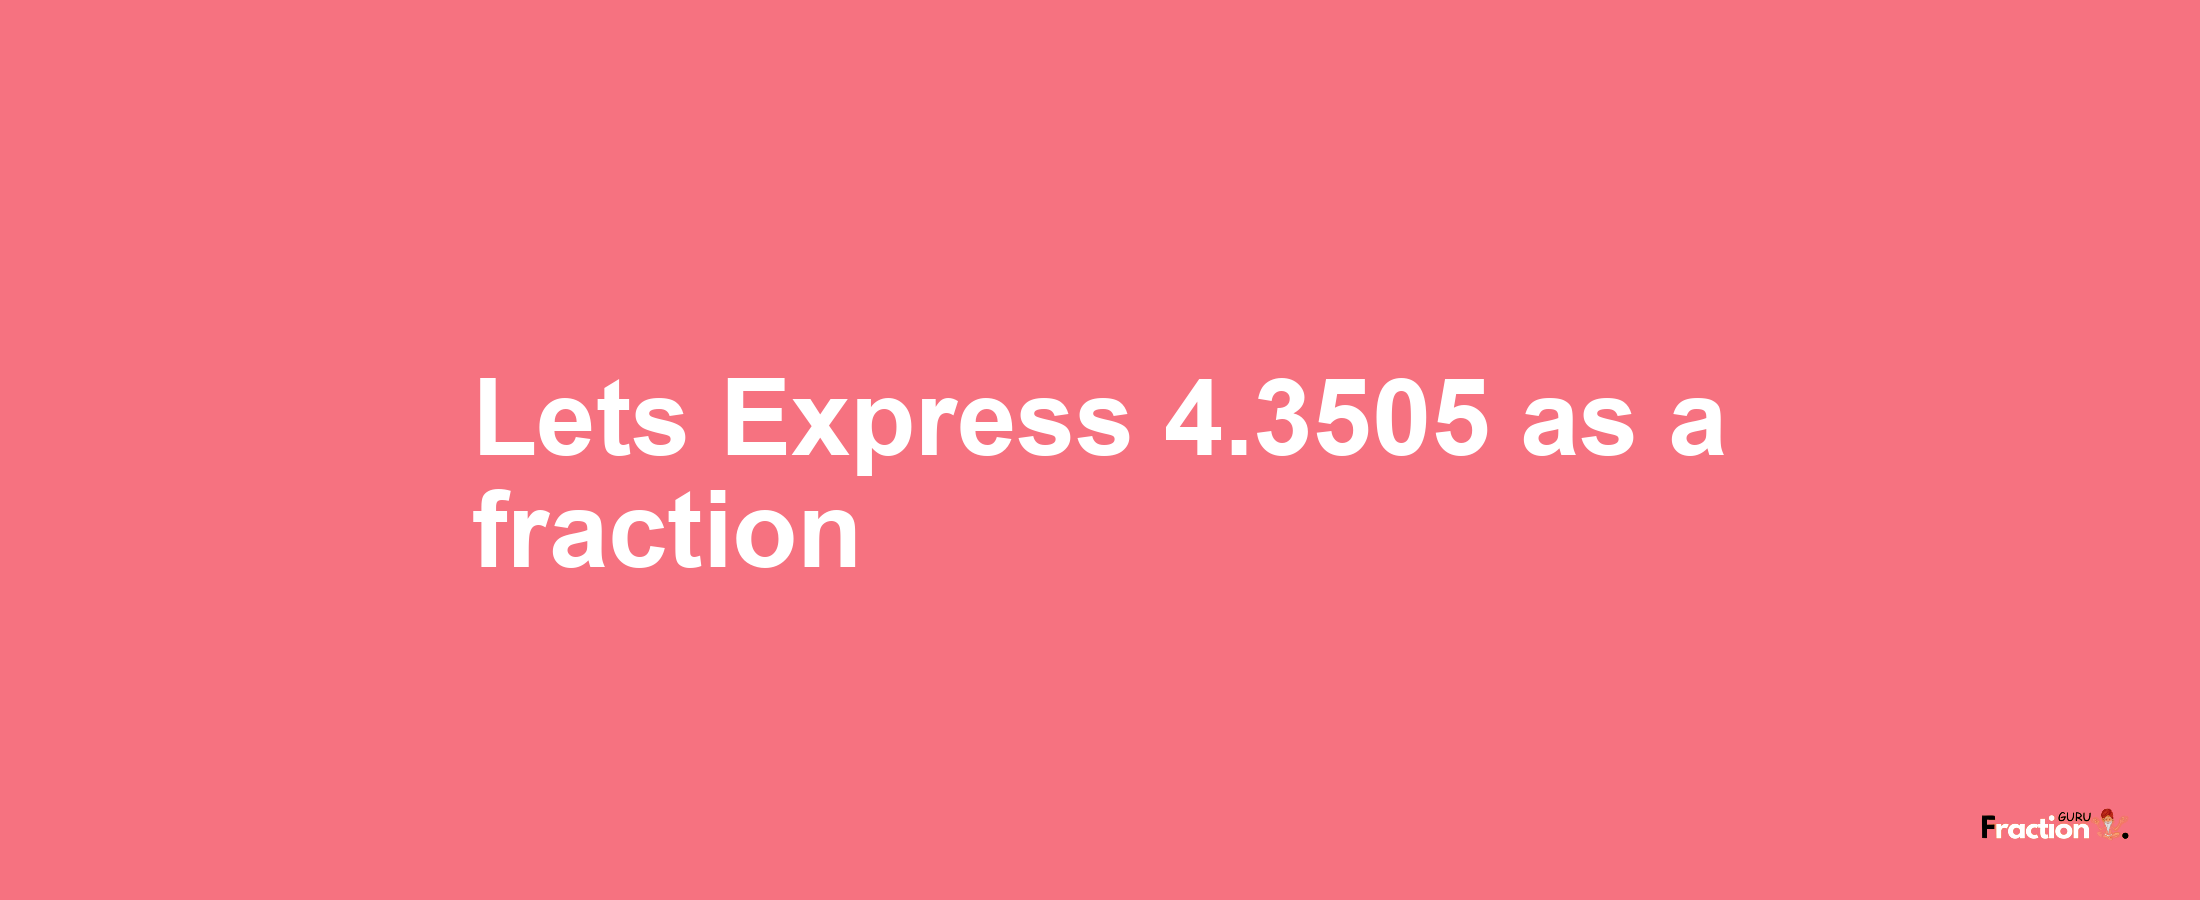 Lets Express 4.3505 as afraction